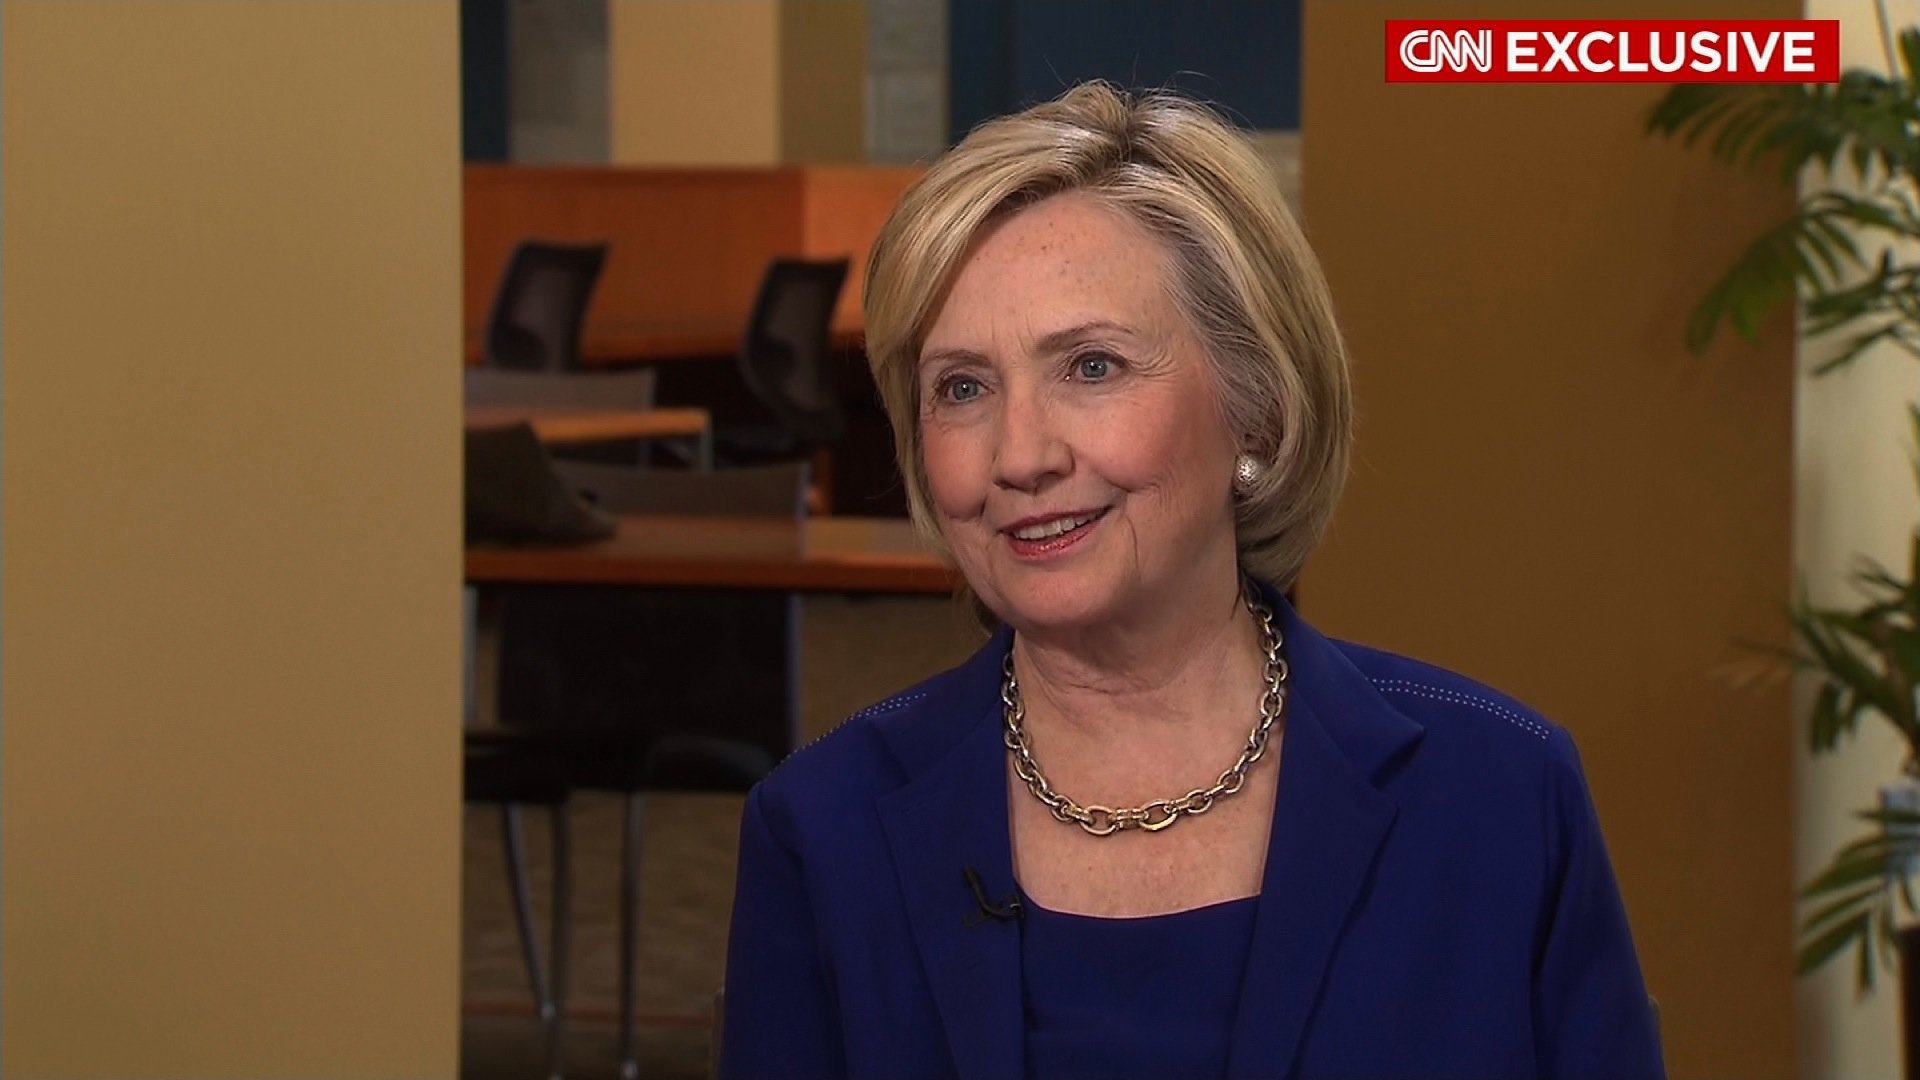 Hillary Clinton gave her first presidential candidate televised national interview with CNN's Brianna Keilar on Tuesday, July 7, 2015.